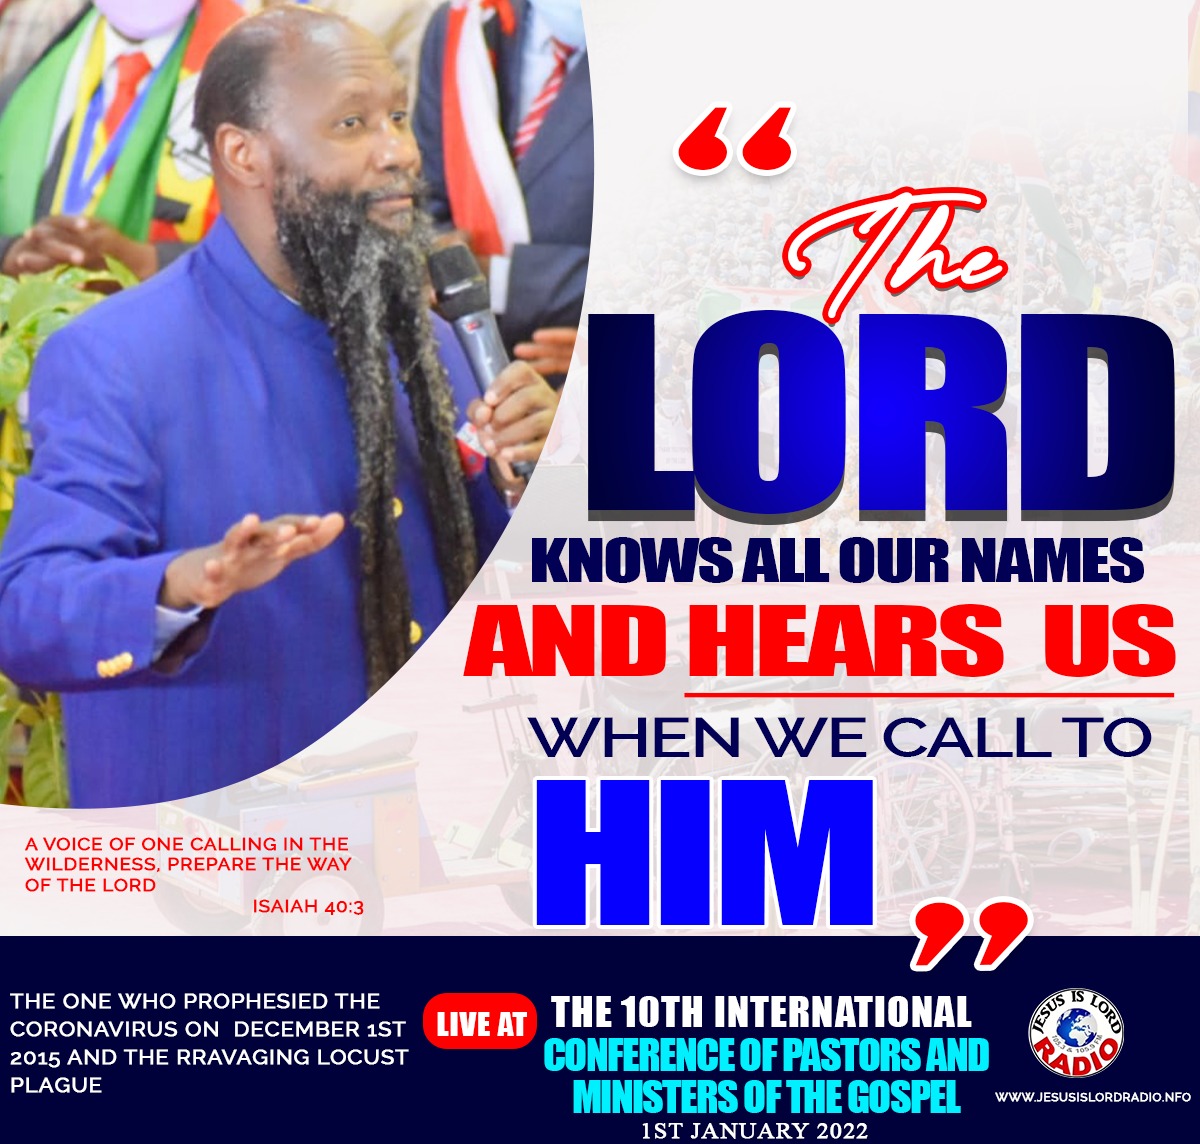 CALL UPON THE NAME OF THE LORD AND BE SAVED
#MaturinHealingService
Come to JESUS just as you are